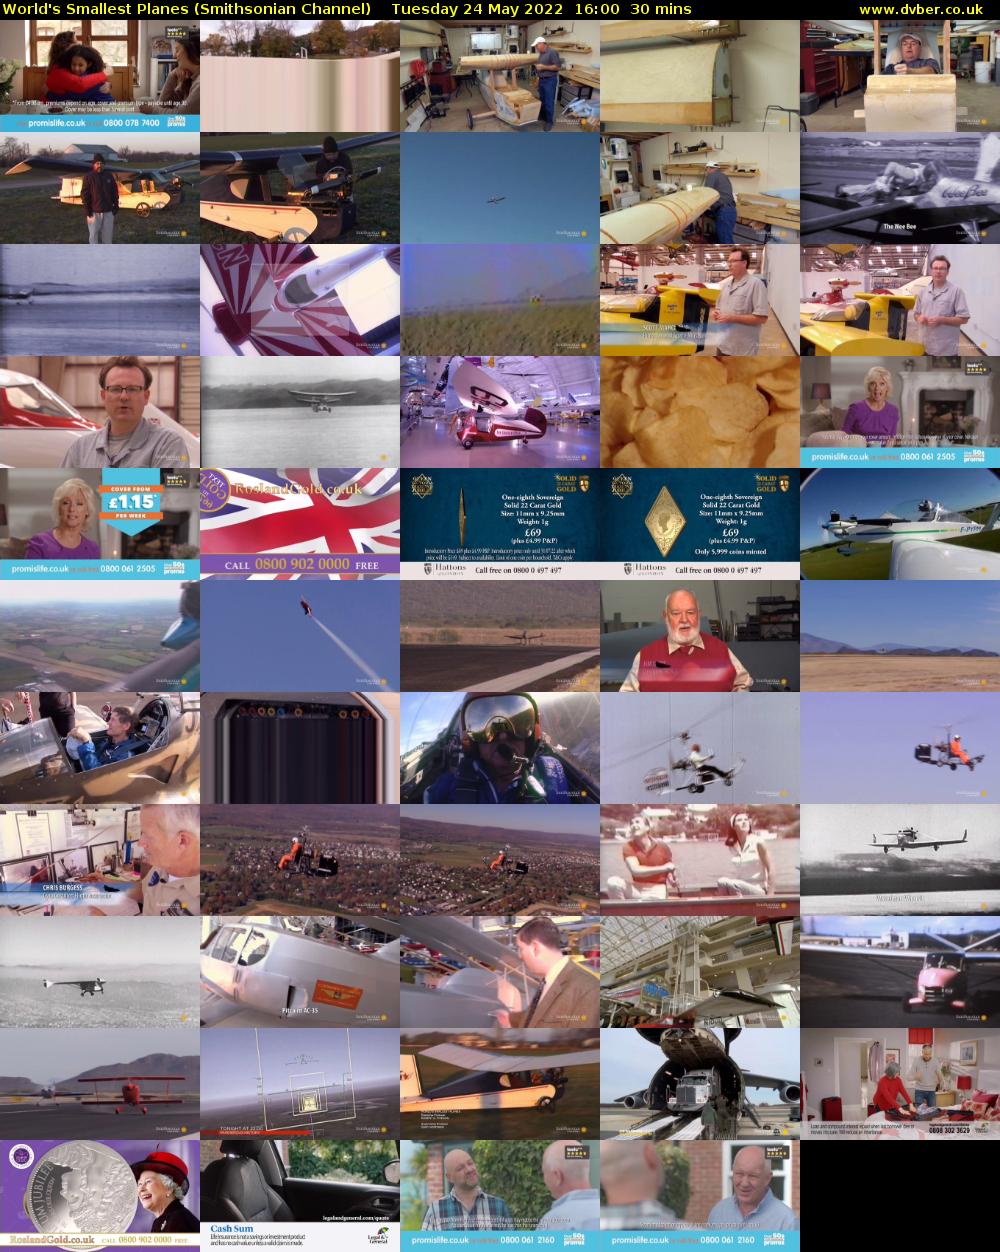 World's Smallest Planes (Smithsonian Channel) Tuesday 24 May 2022 16:00 - 16:30